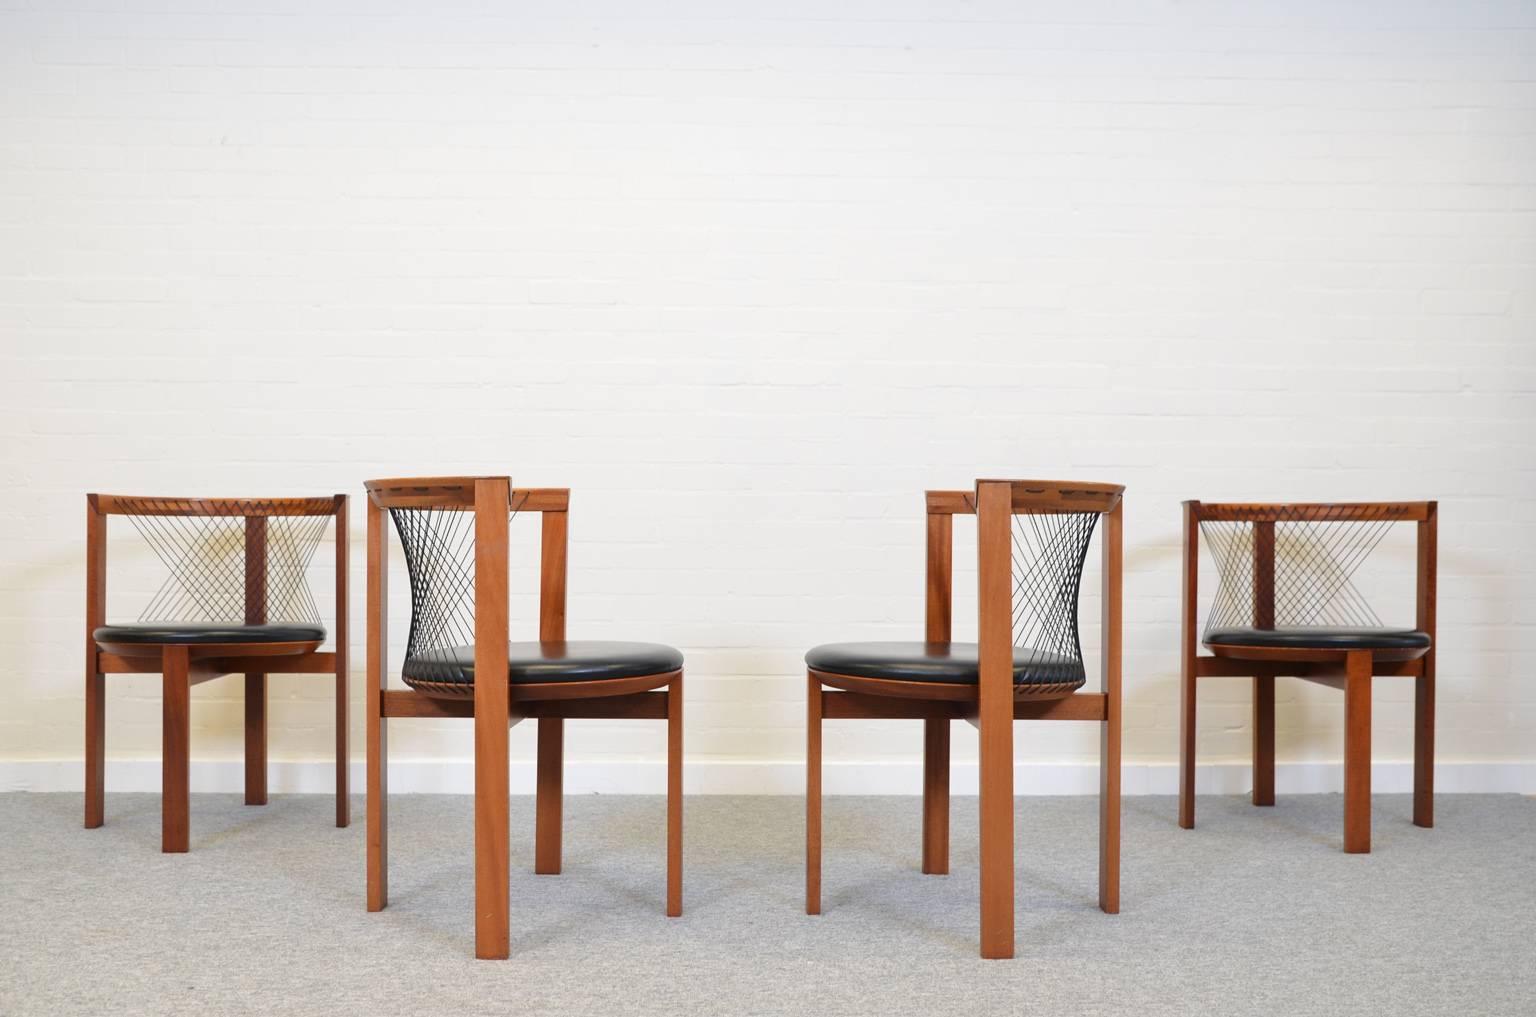 Set of four dining chairs by Niels Jørgen Haugesen for Tranekaer. The chairs have a mahogany base and black leather seats. Backs with black nylon cords. The chairs are all in a very good condition.